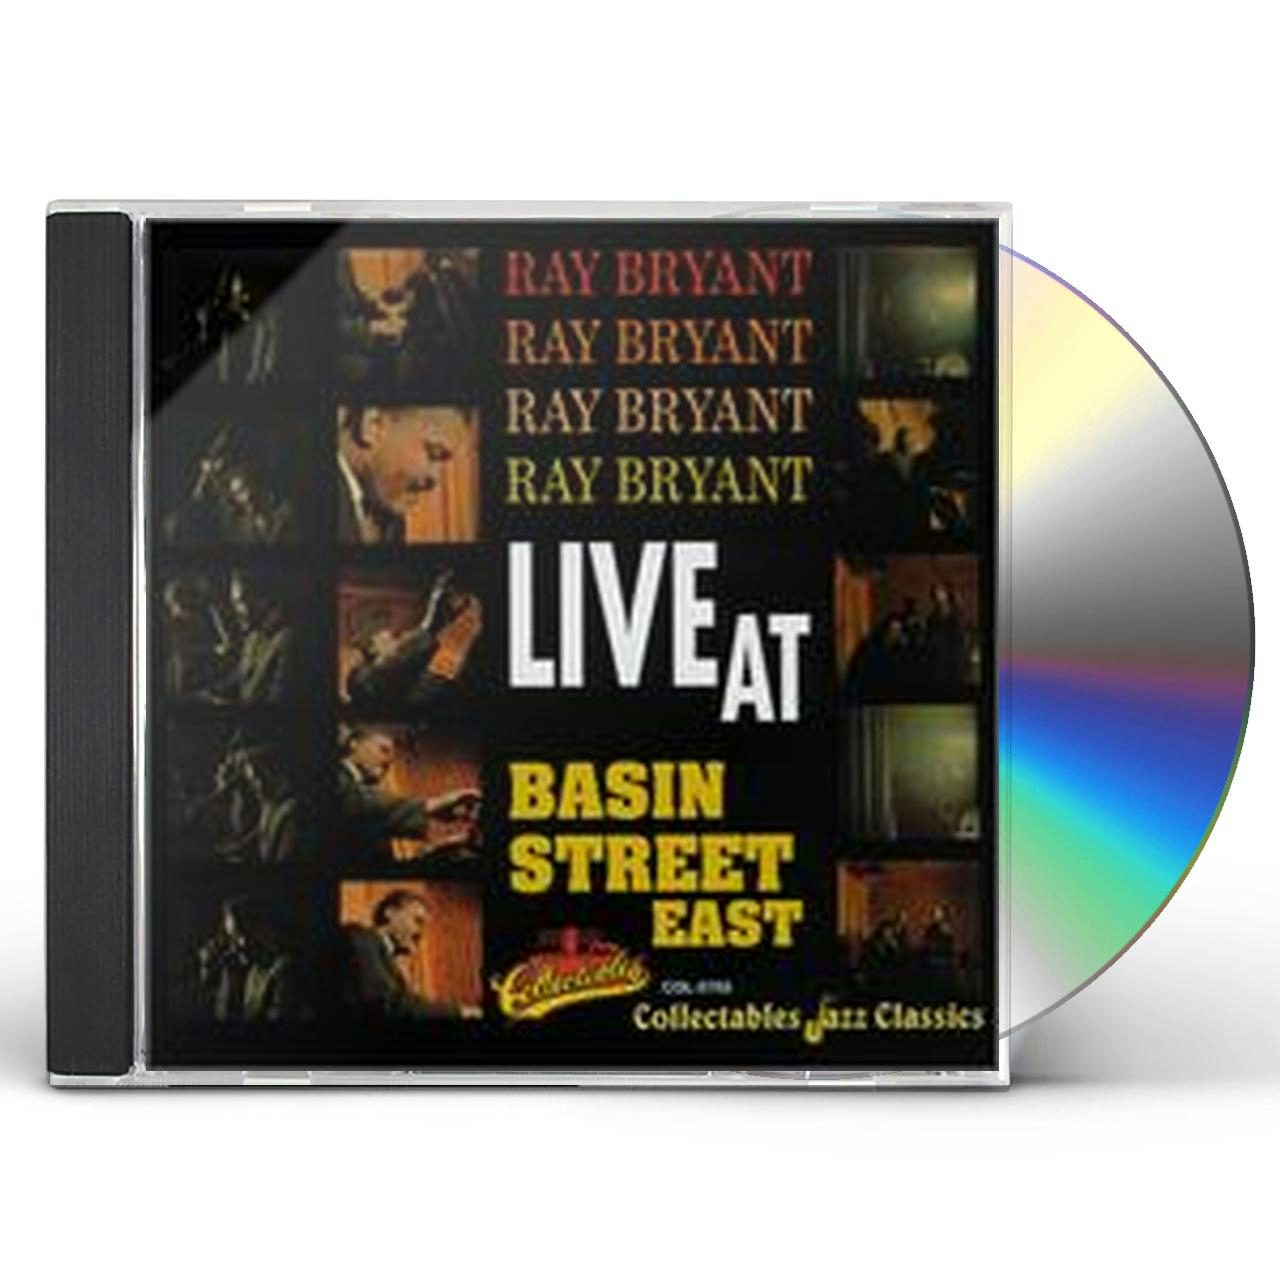 Ray Bryant LIVE AT BASIN STREET EAST CD